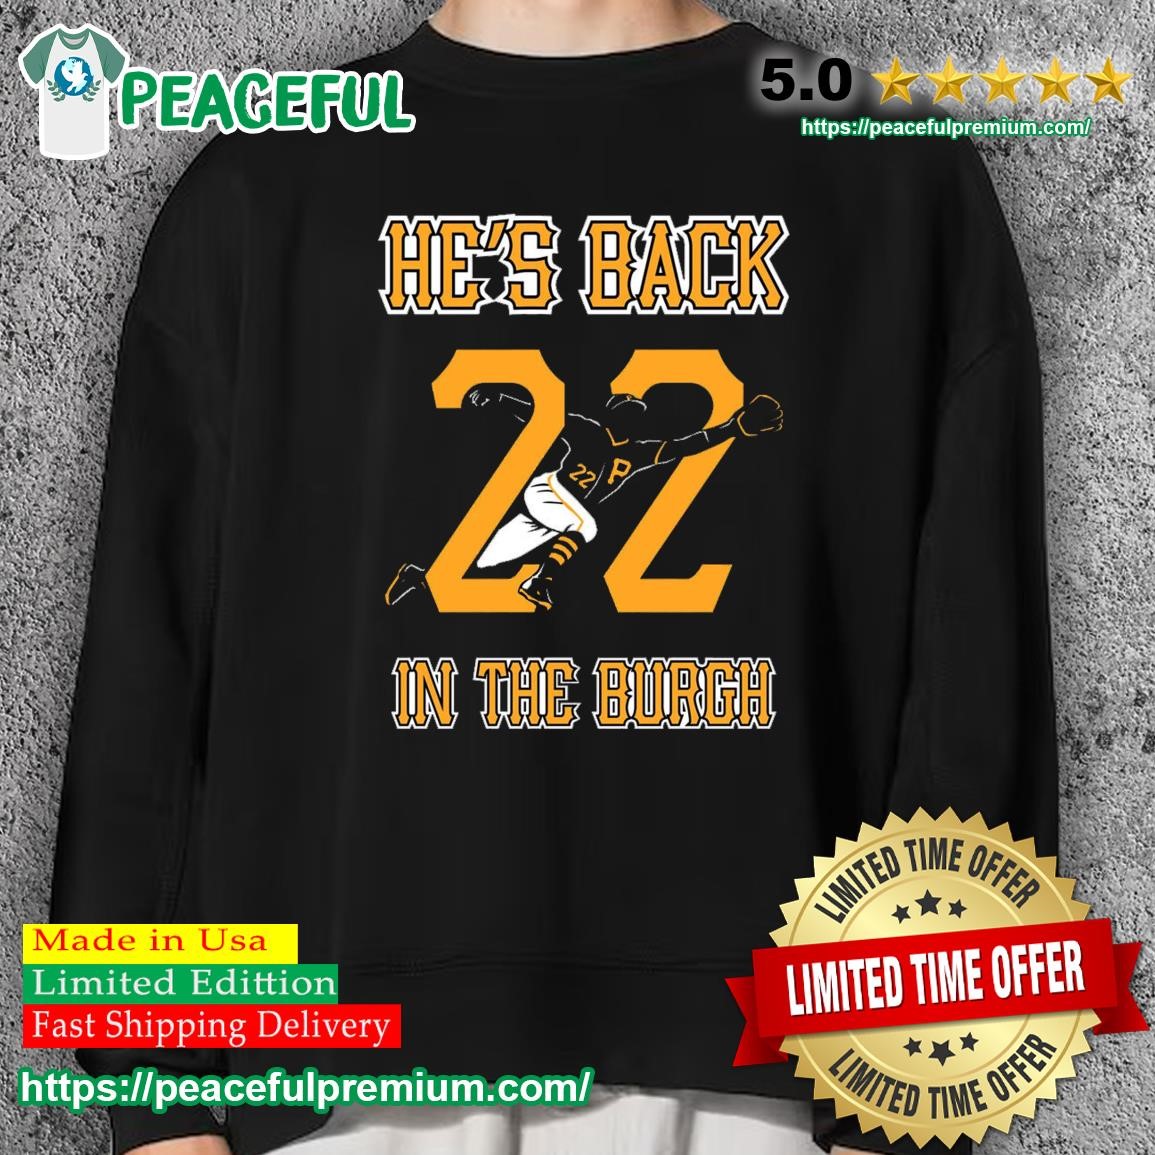 Pittsburgh Pirates Born To Be A Pirates Fan Shirt, hoodie, sweater